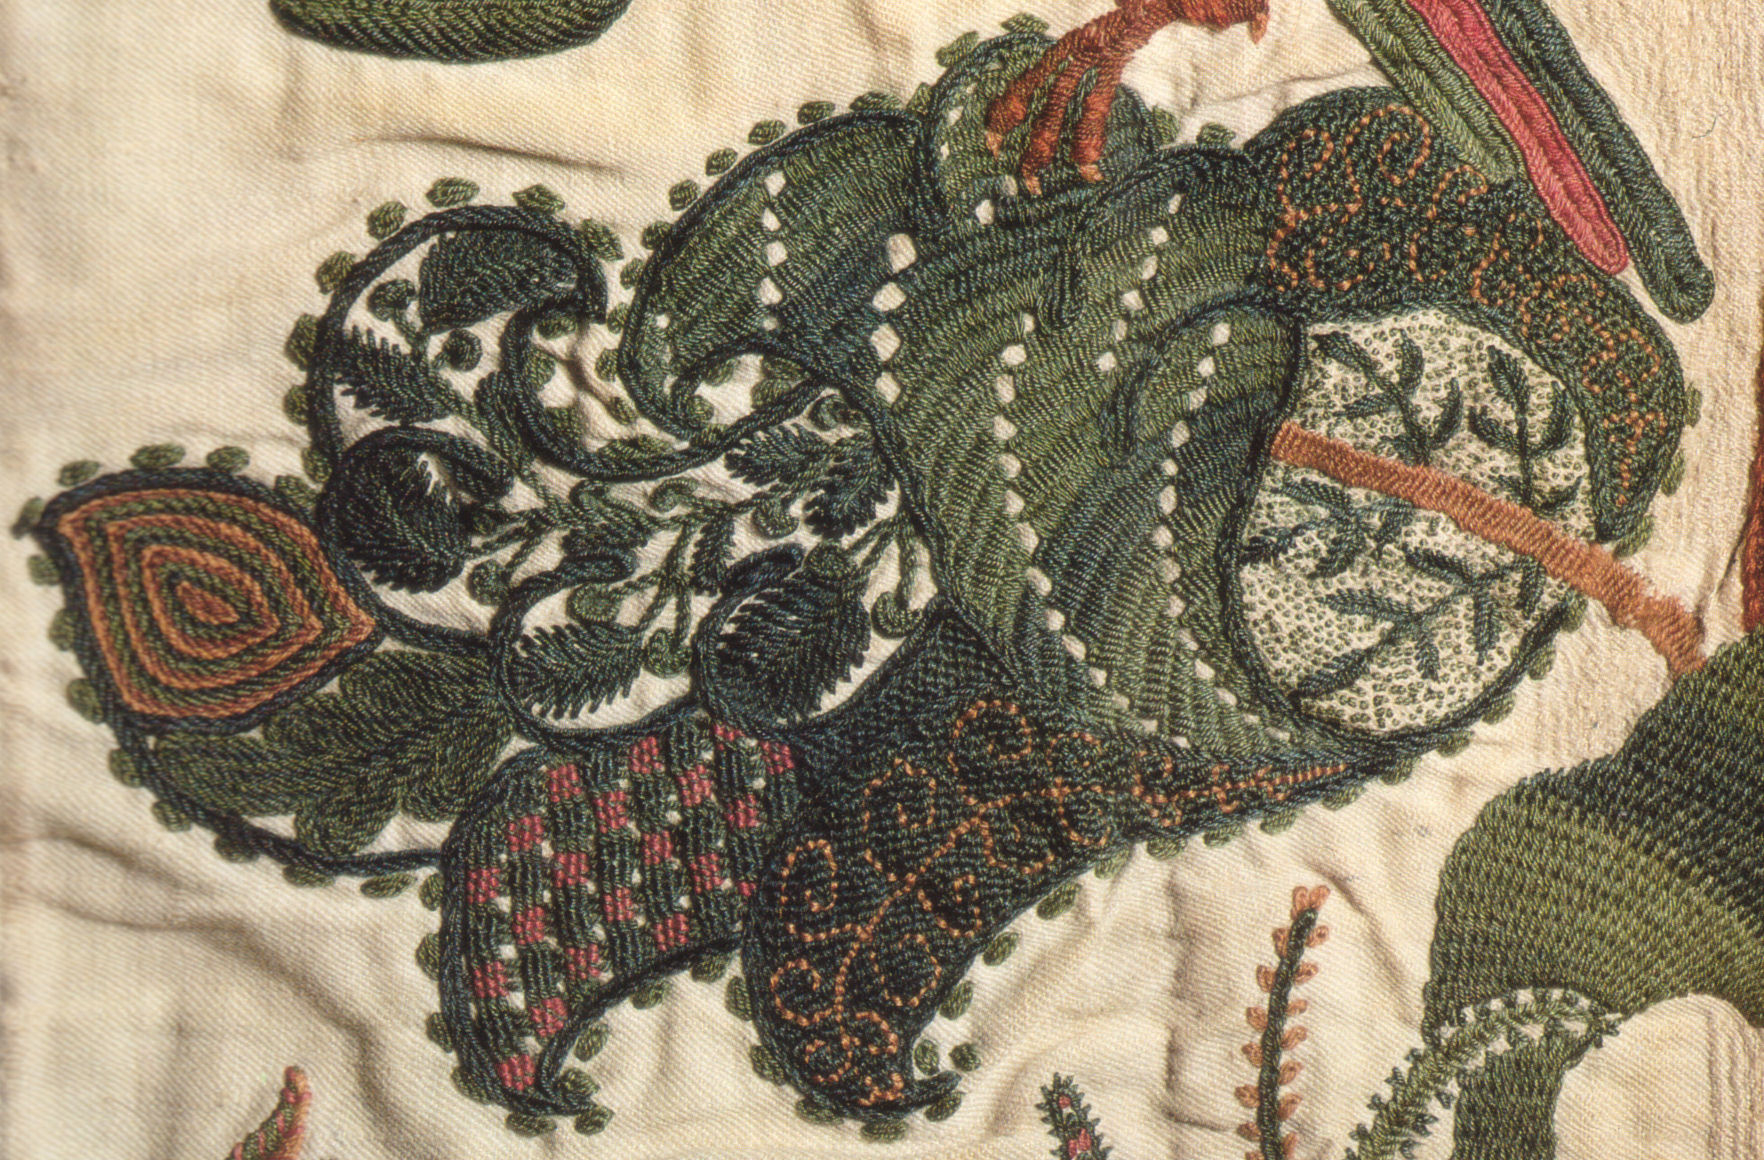 Silk Embroidery Patterns Free Crewel Embroidery Wikipedia